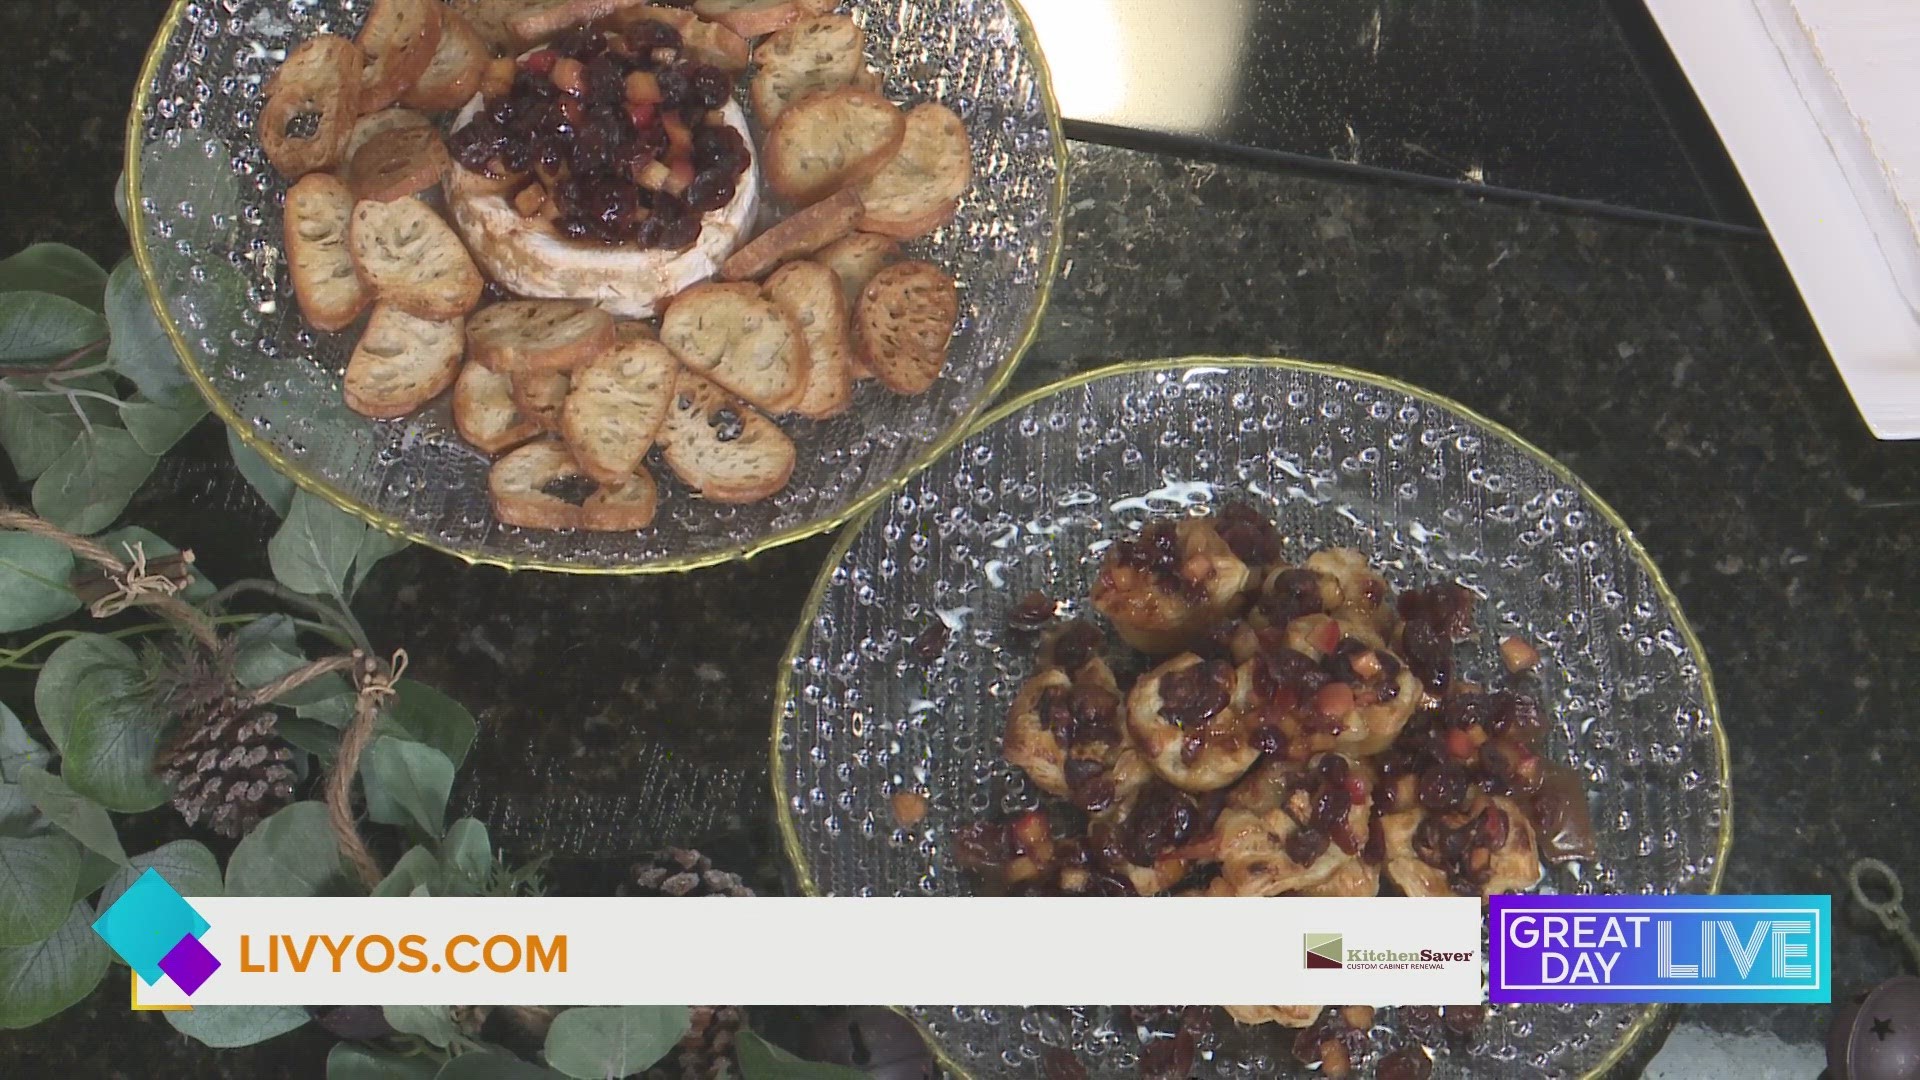 Lennise Germany with Livy O’s shares some inspiration for this year’s Christmas dinner.